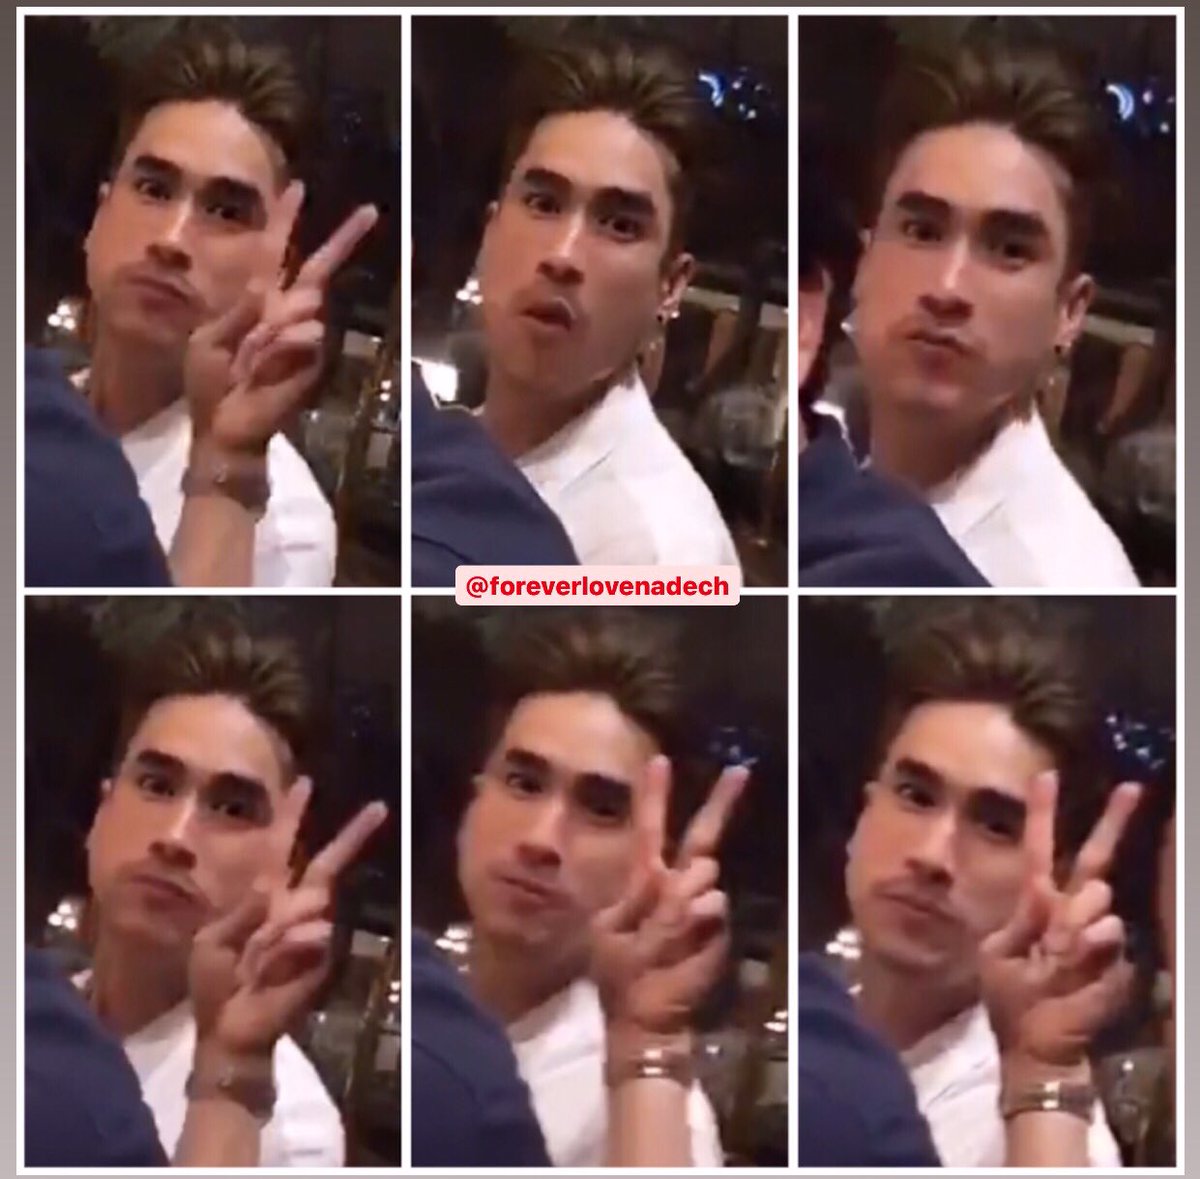 Haha! This cutiepie!  I really love his new hairstyle.  #nadech  #ณเดชน์